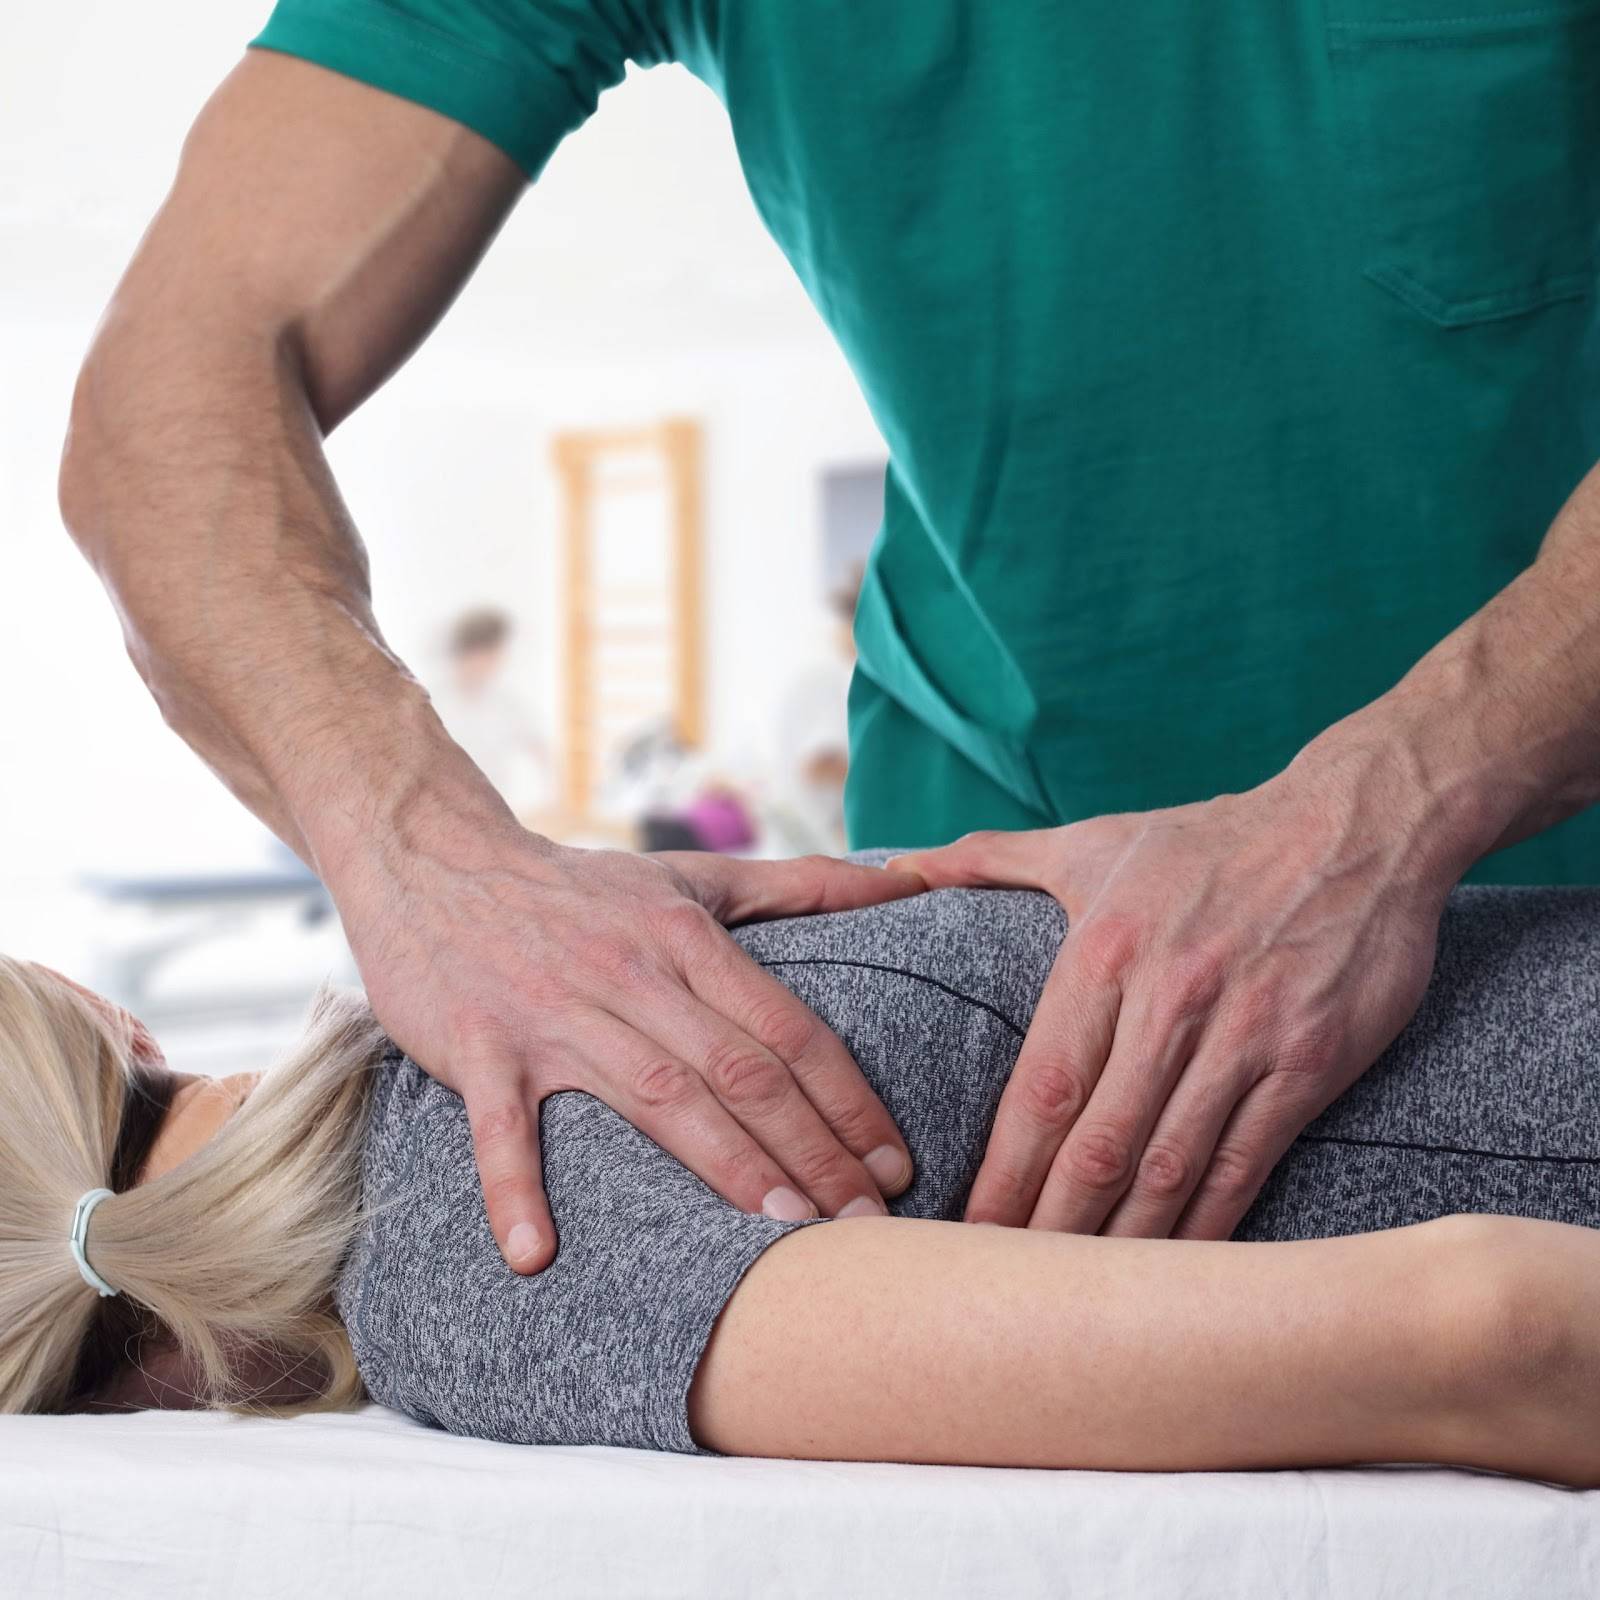 What falls under manual therapy?